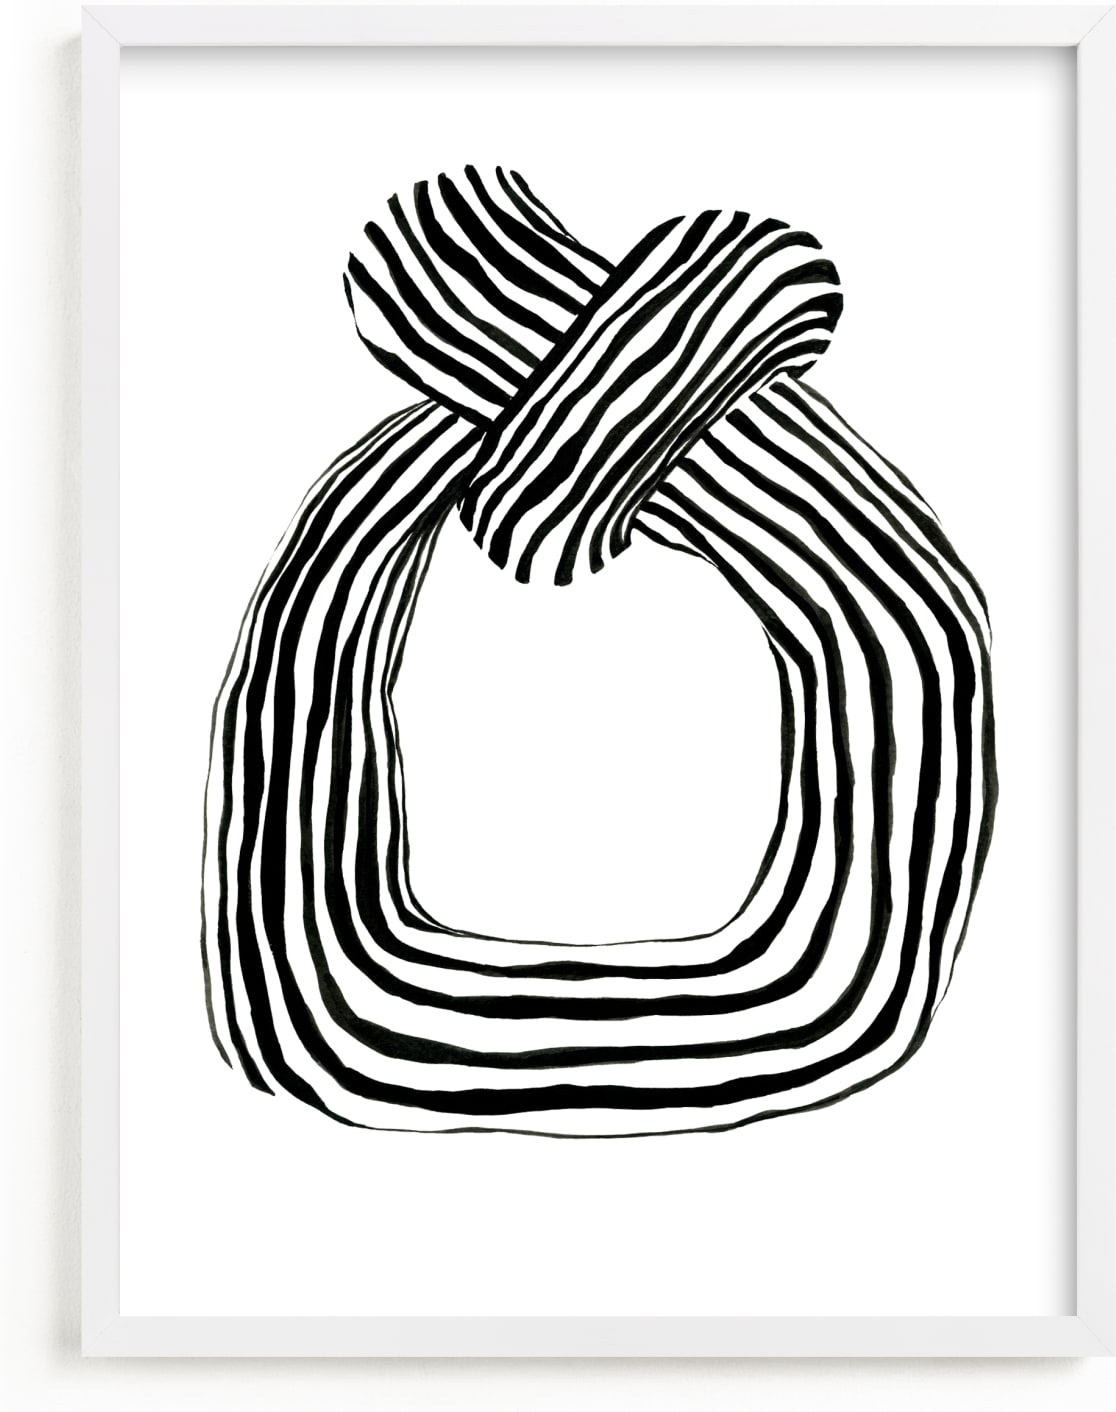 This is a black and white art by Pati Cascino called Flowy.